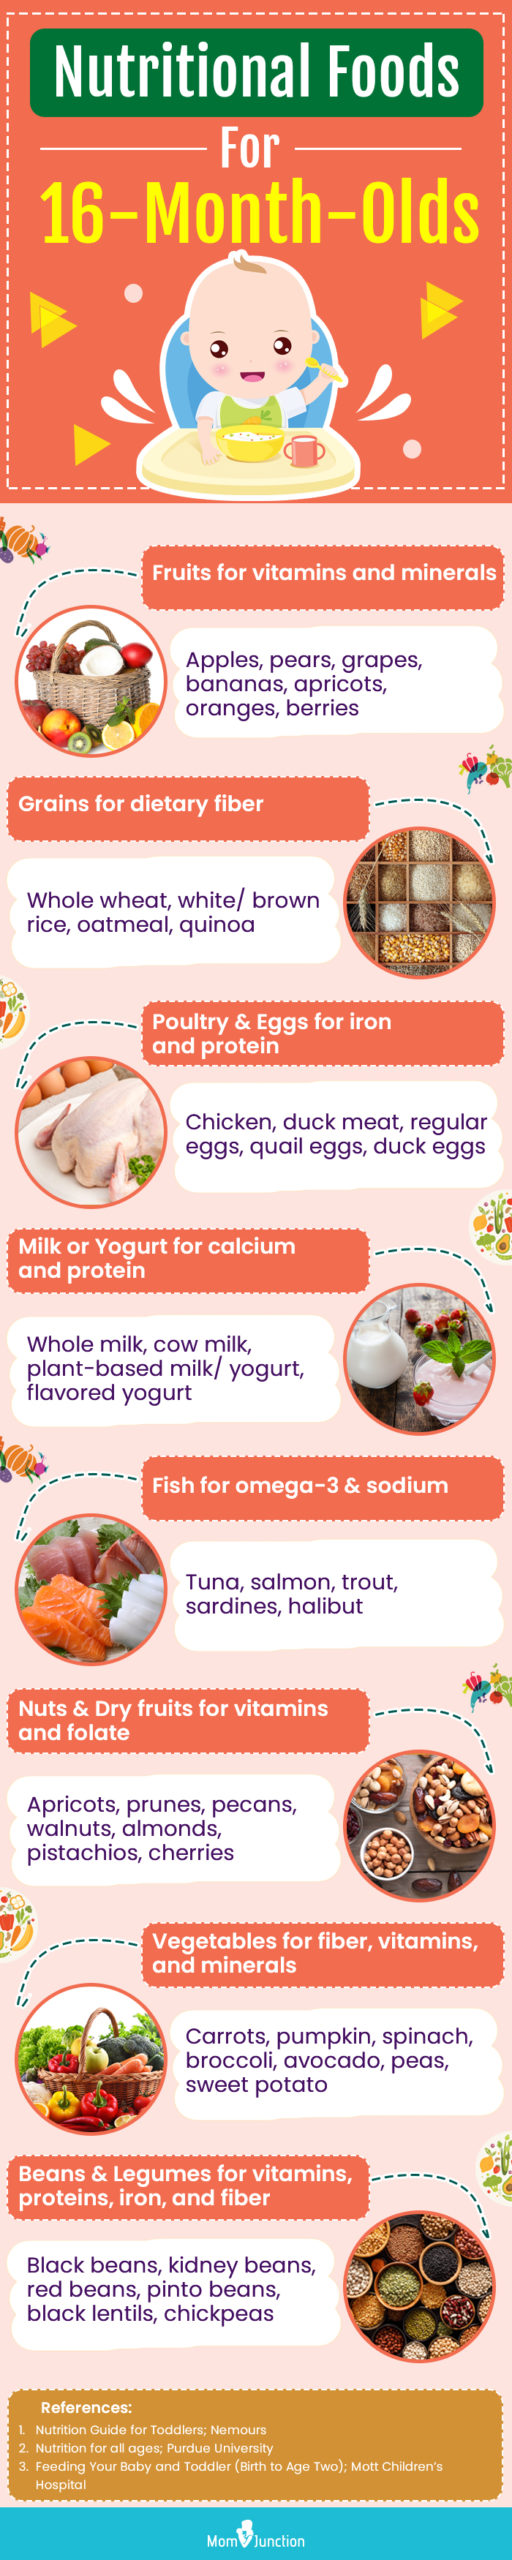 nutritional foods for 16 month olds (infographic)